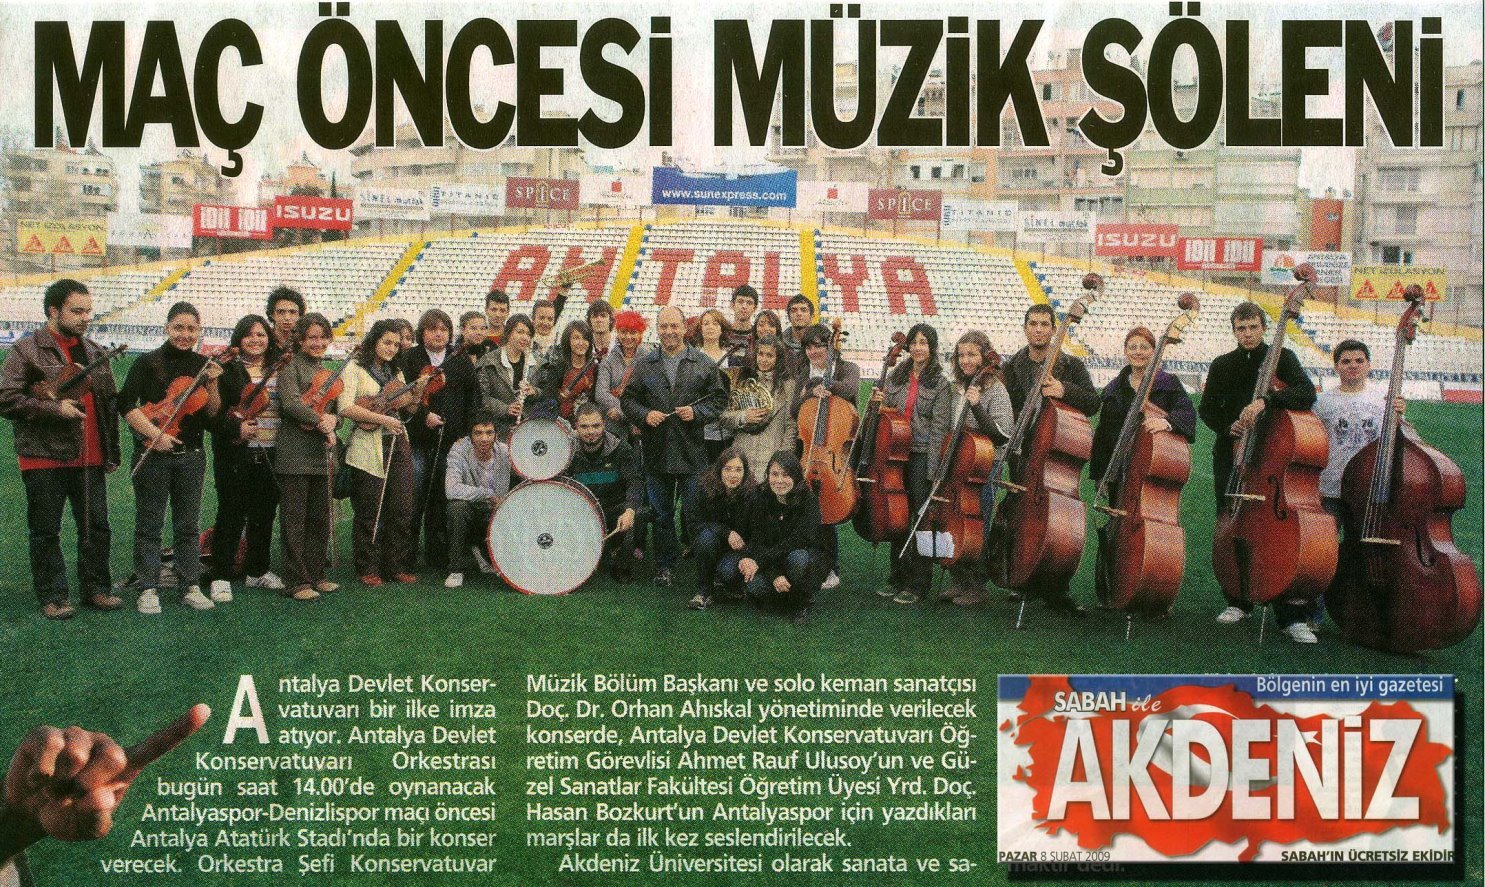 "Musical Feast before Match" read the Sabah daily newspaper, 8 February 2009